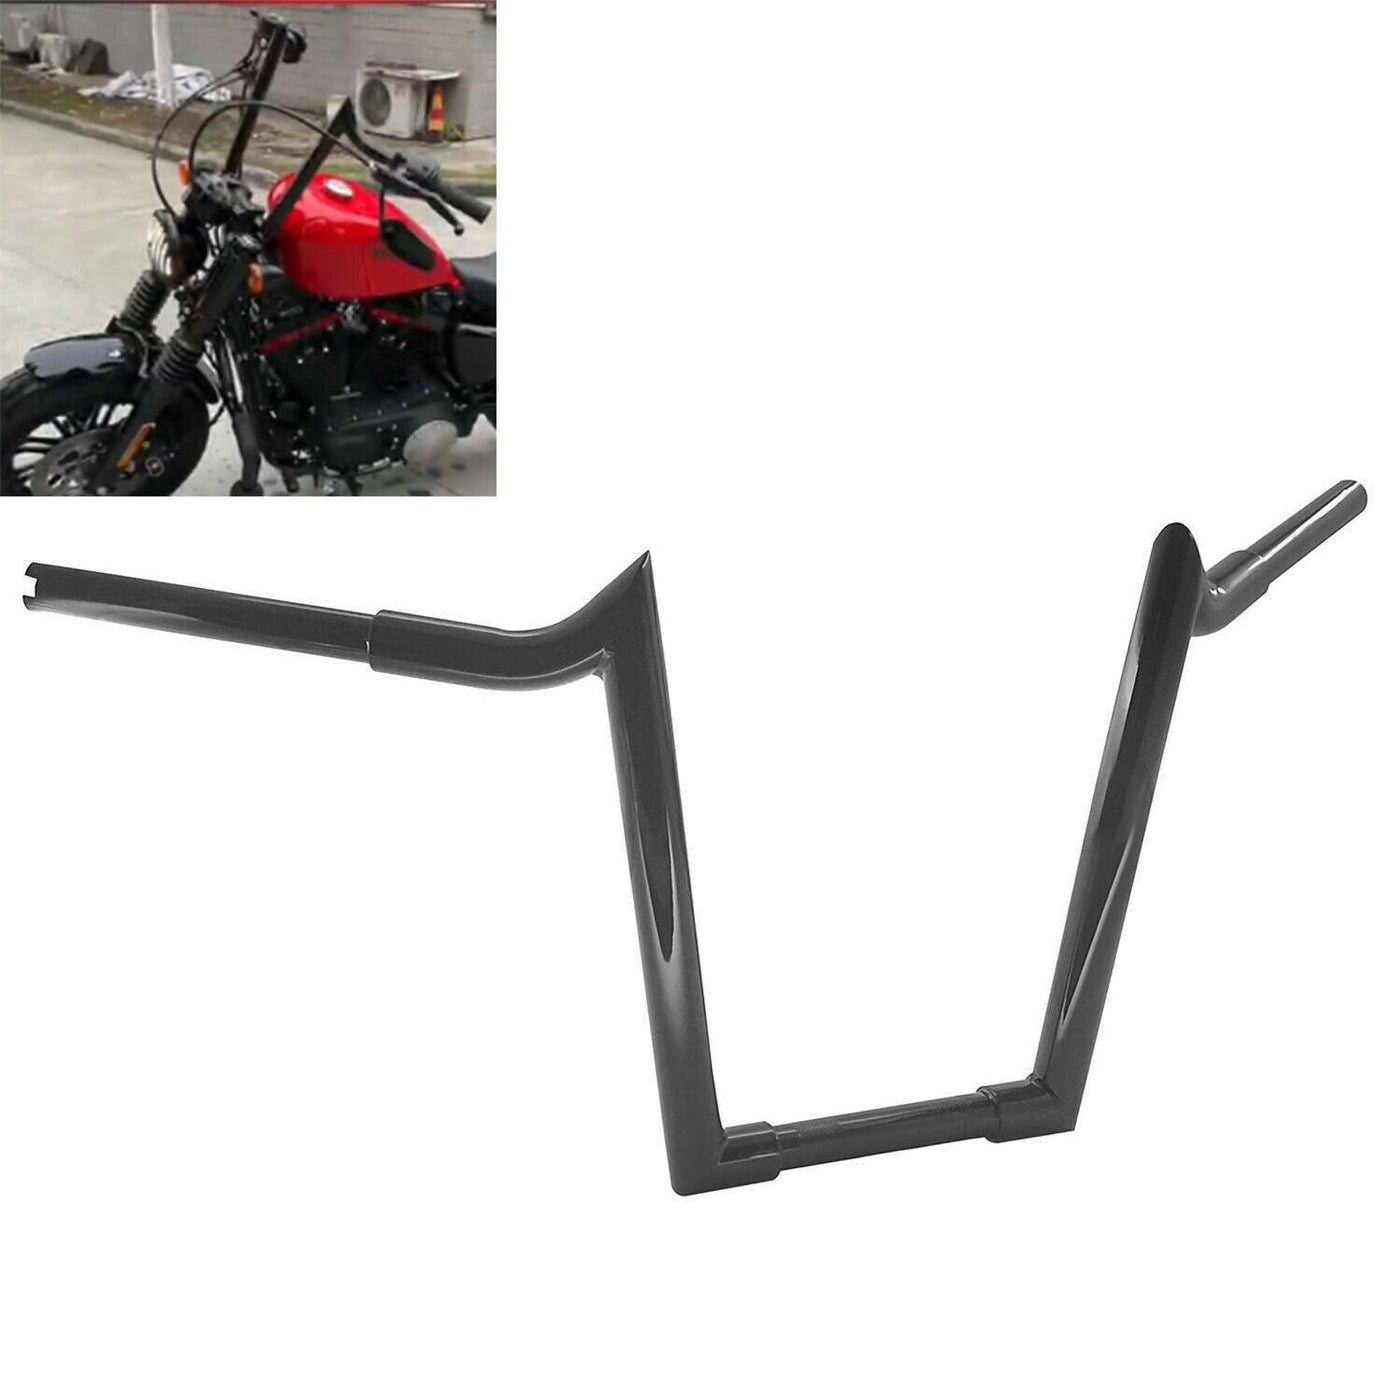 14" Rise Fat Ape Hanger Bar Handlebar For Harley Sportster Softail Dyna - Moto Life Products